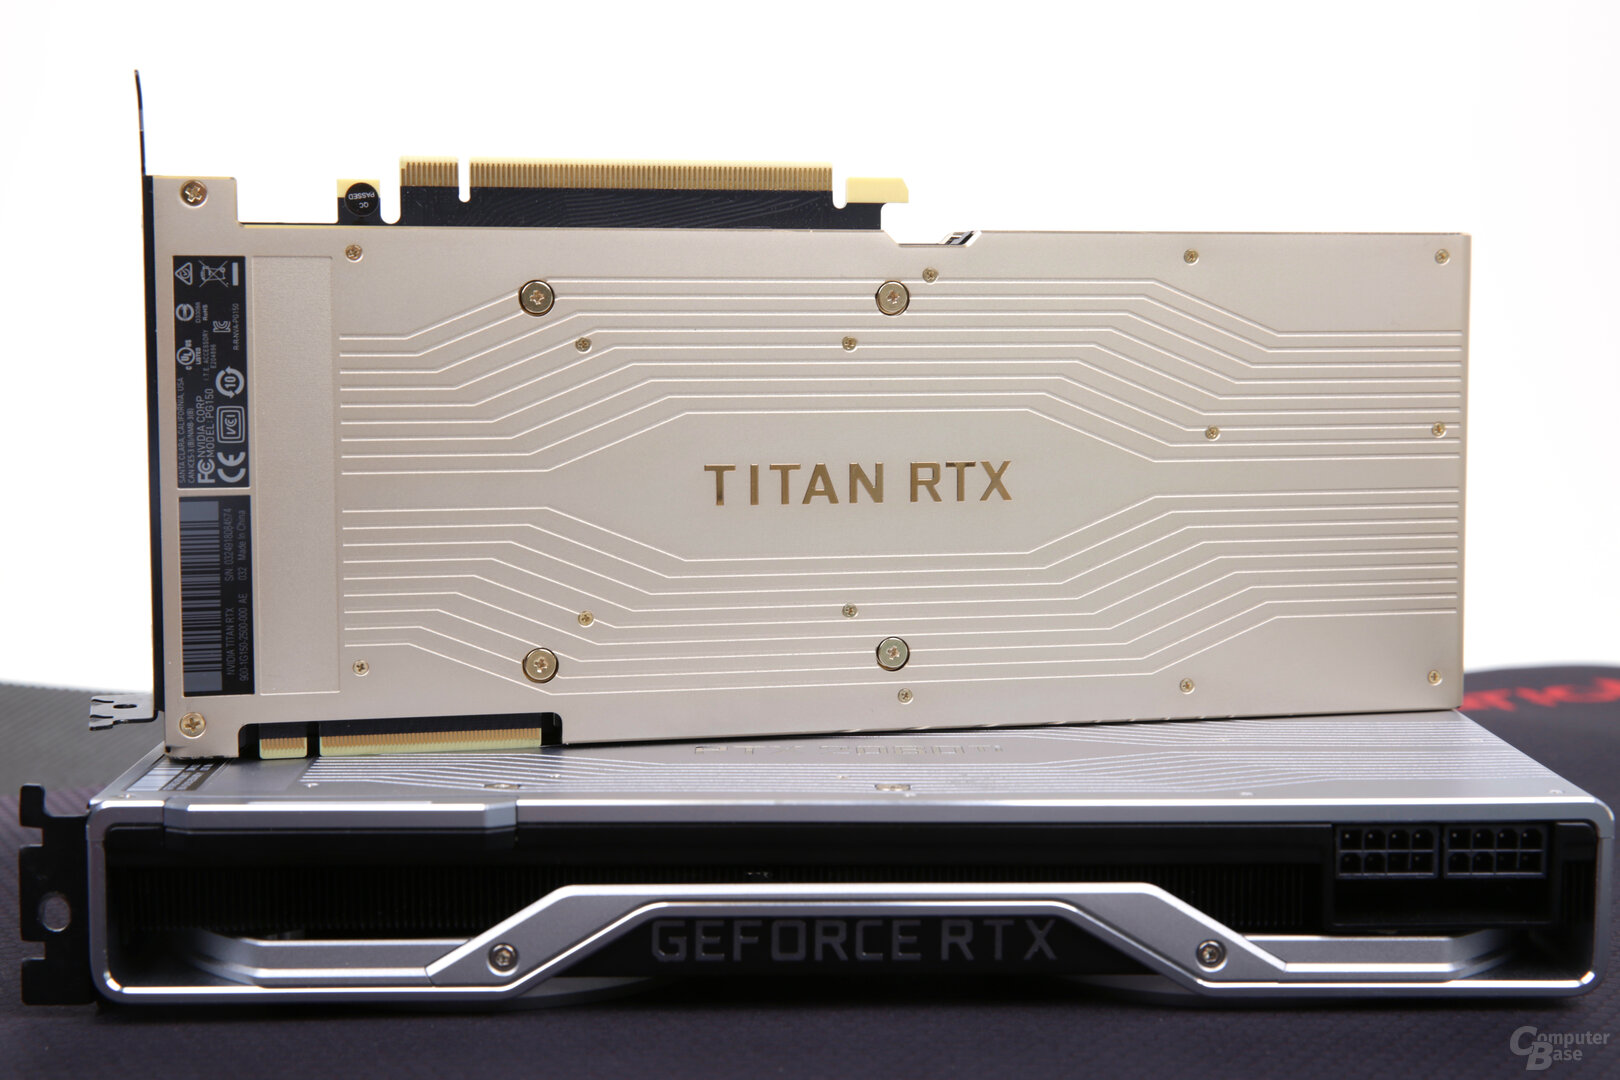 Mifcom PC with 2 × Titan RTX in the test